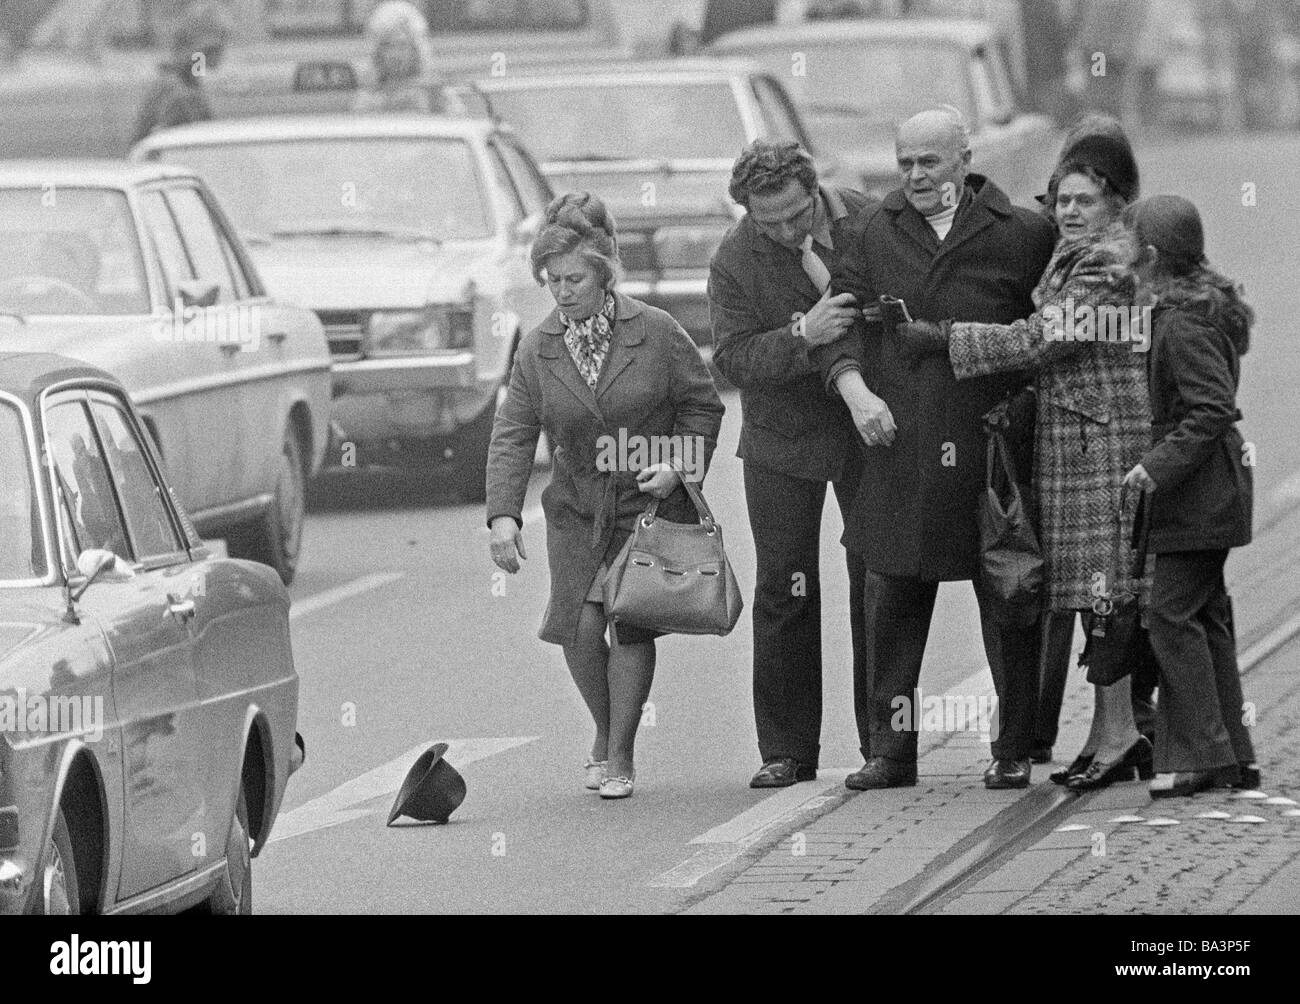 Seventies, black and white photo, people, road traffic, older man is shocked after a road accident, some passersby help him going up, aged 70 to 80 years Stock Photo